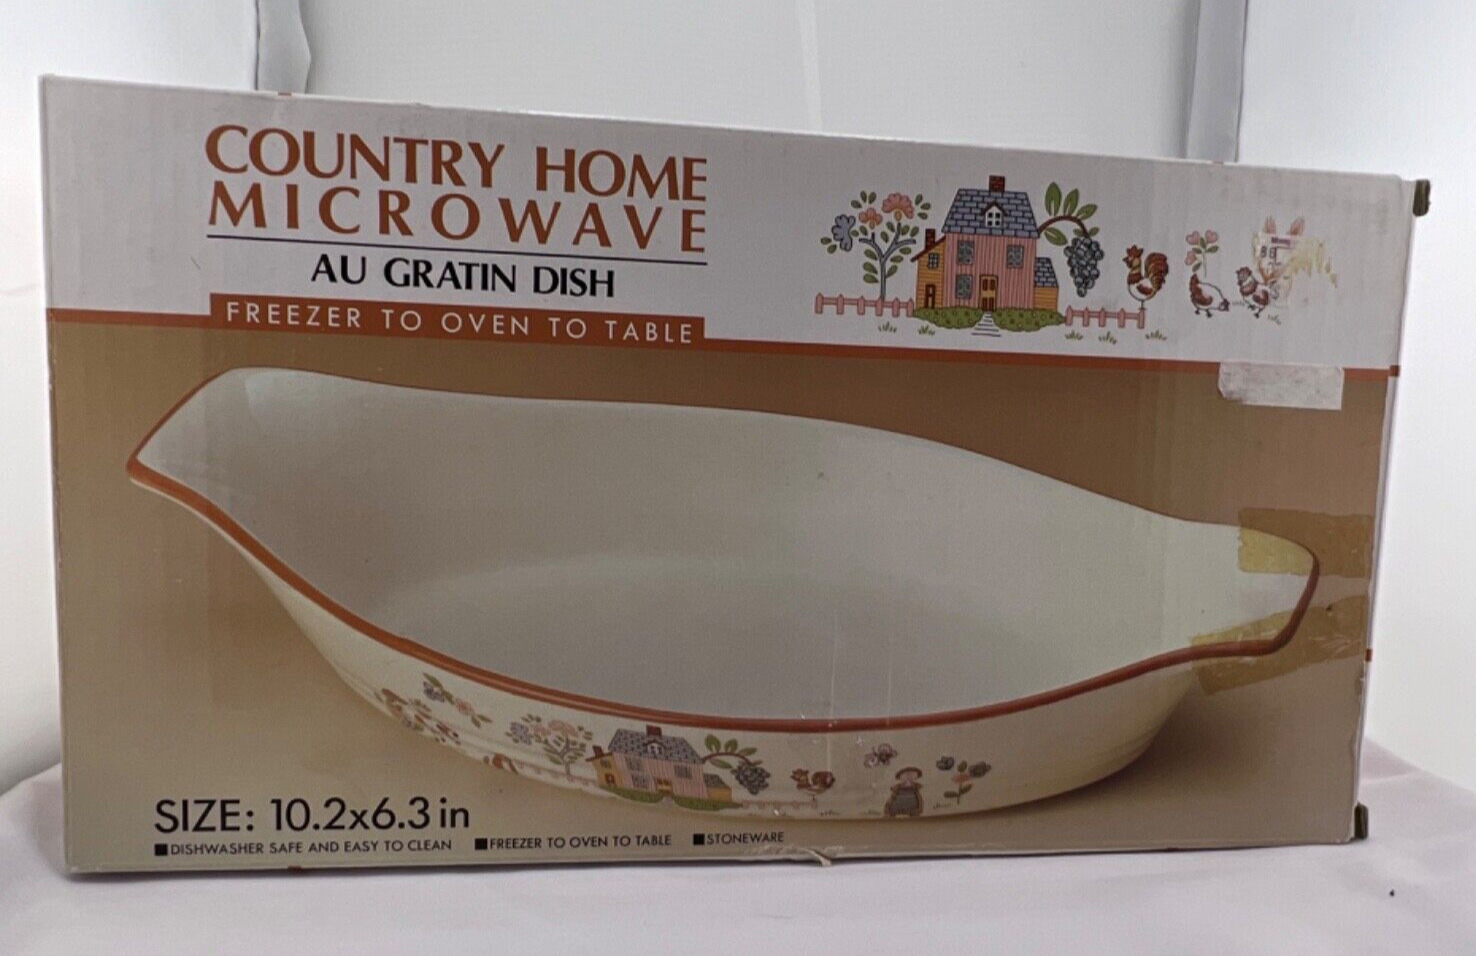 Country Home Microwave Au Gratin Dish 10.2 x 6.3 in